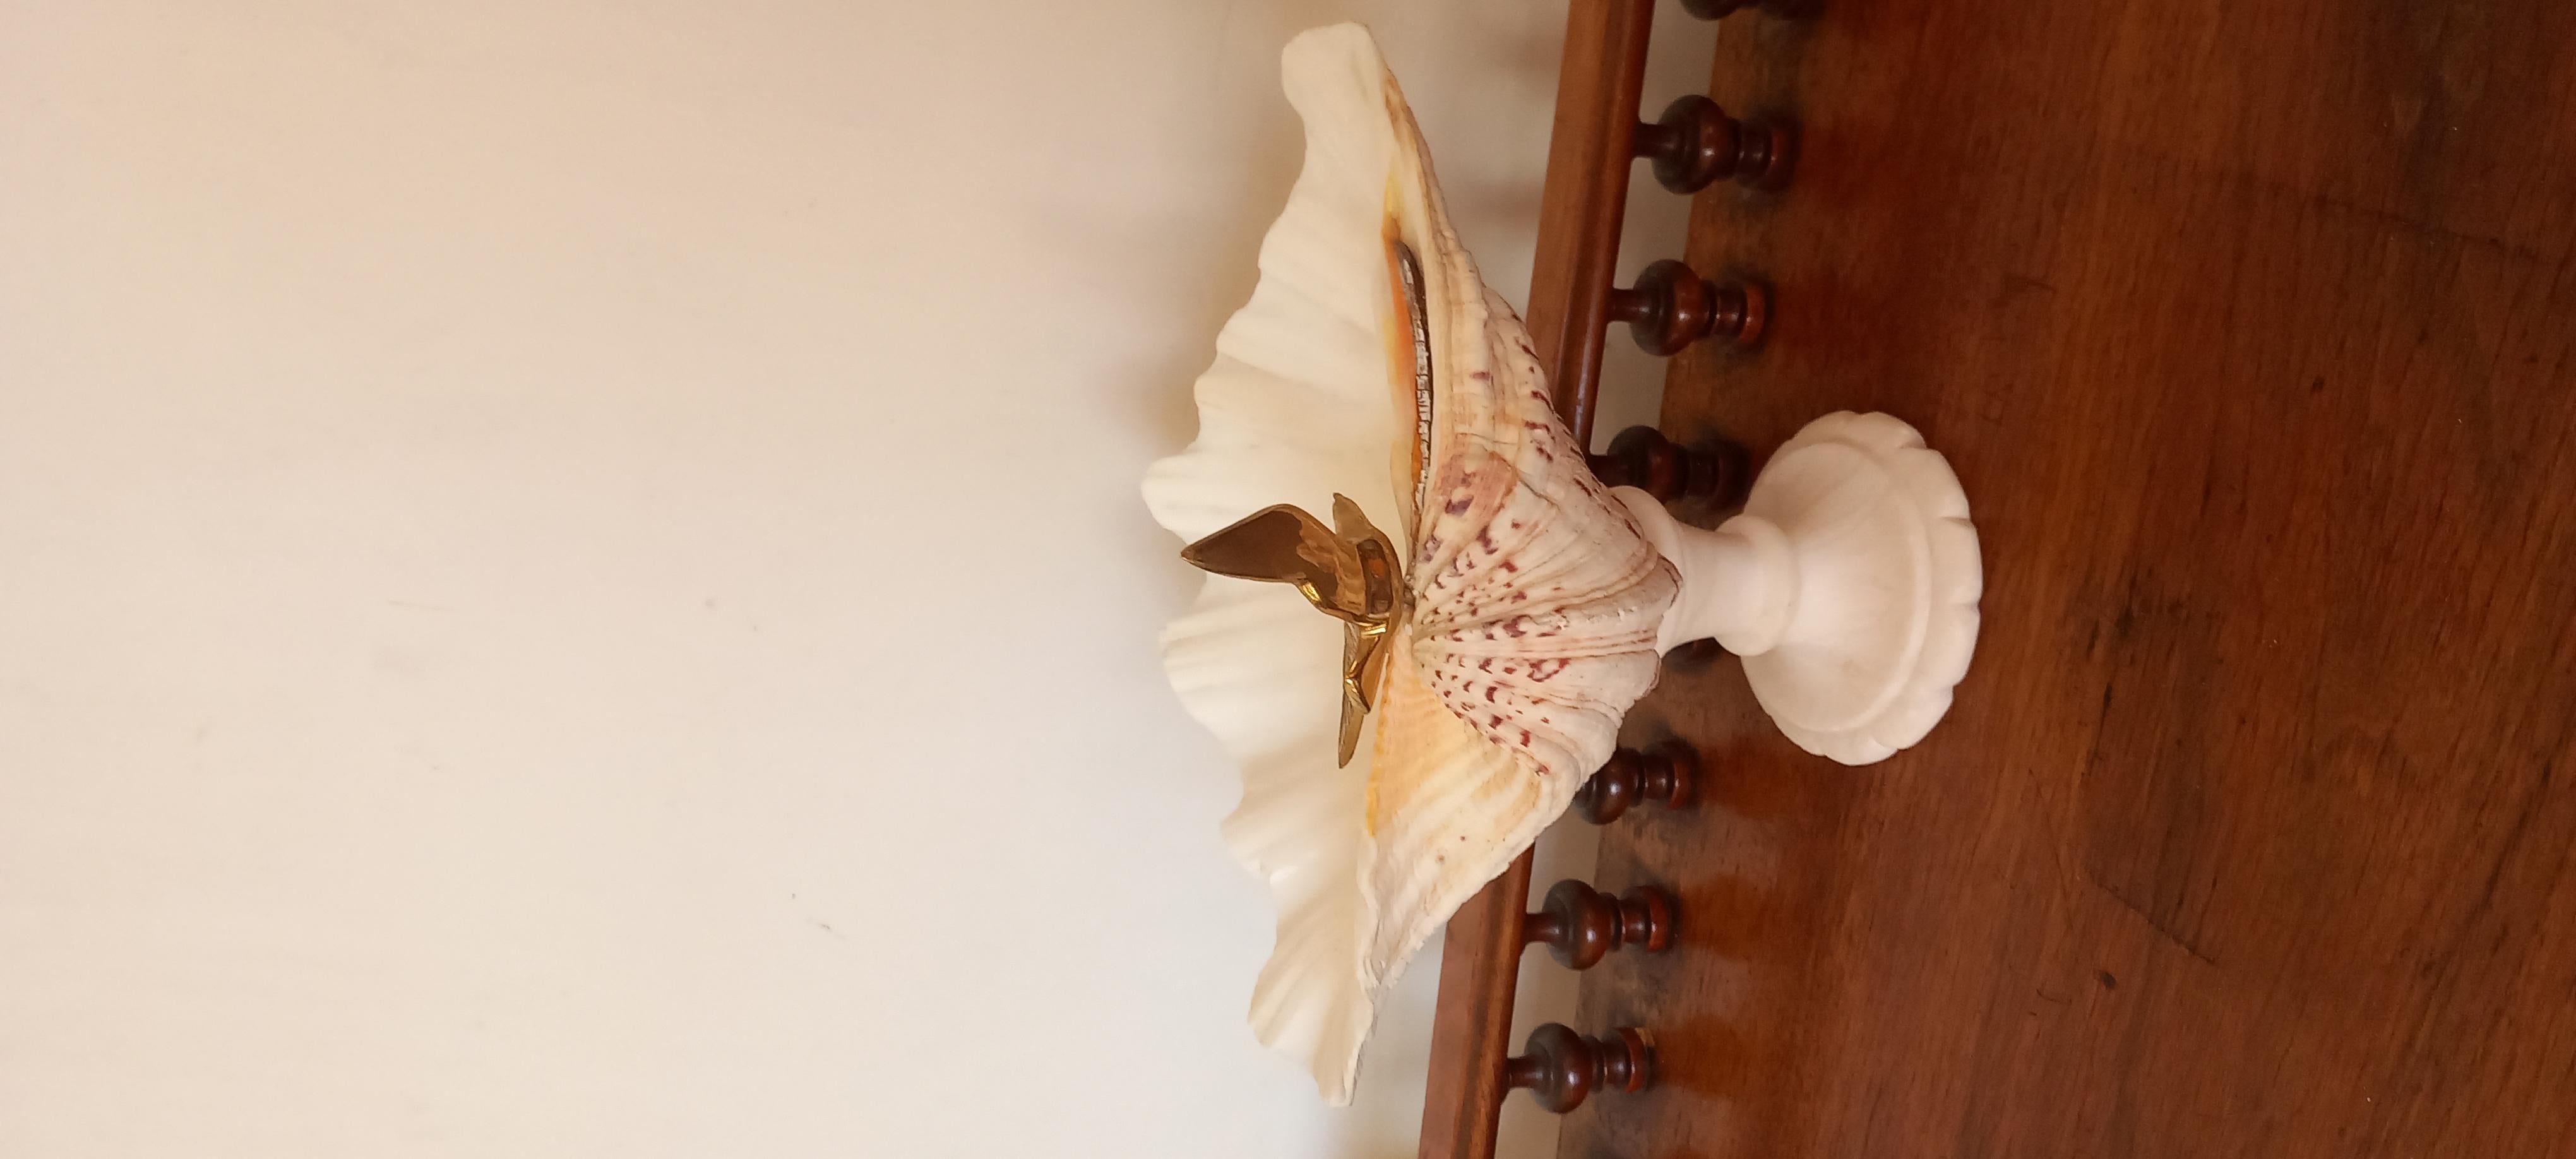  Shell Natural Specimen  With White Marble Pedestal Bronze Bird Can Be Removed For Sale 4